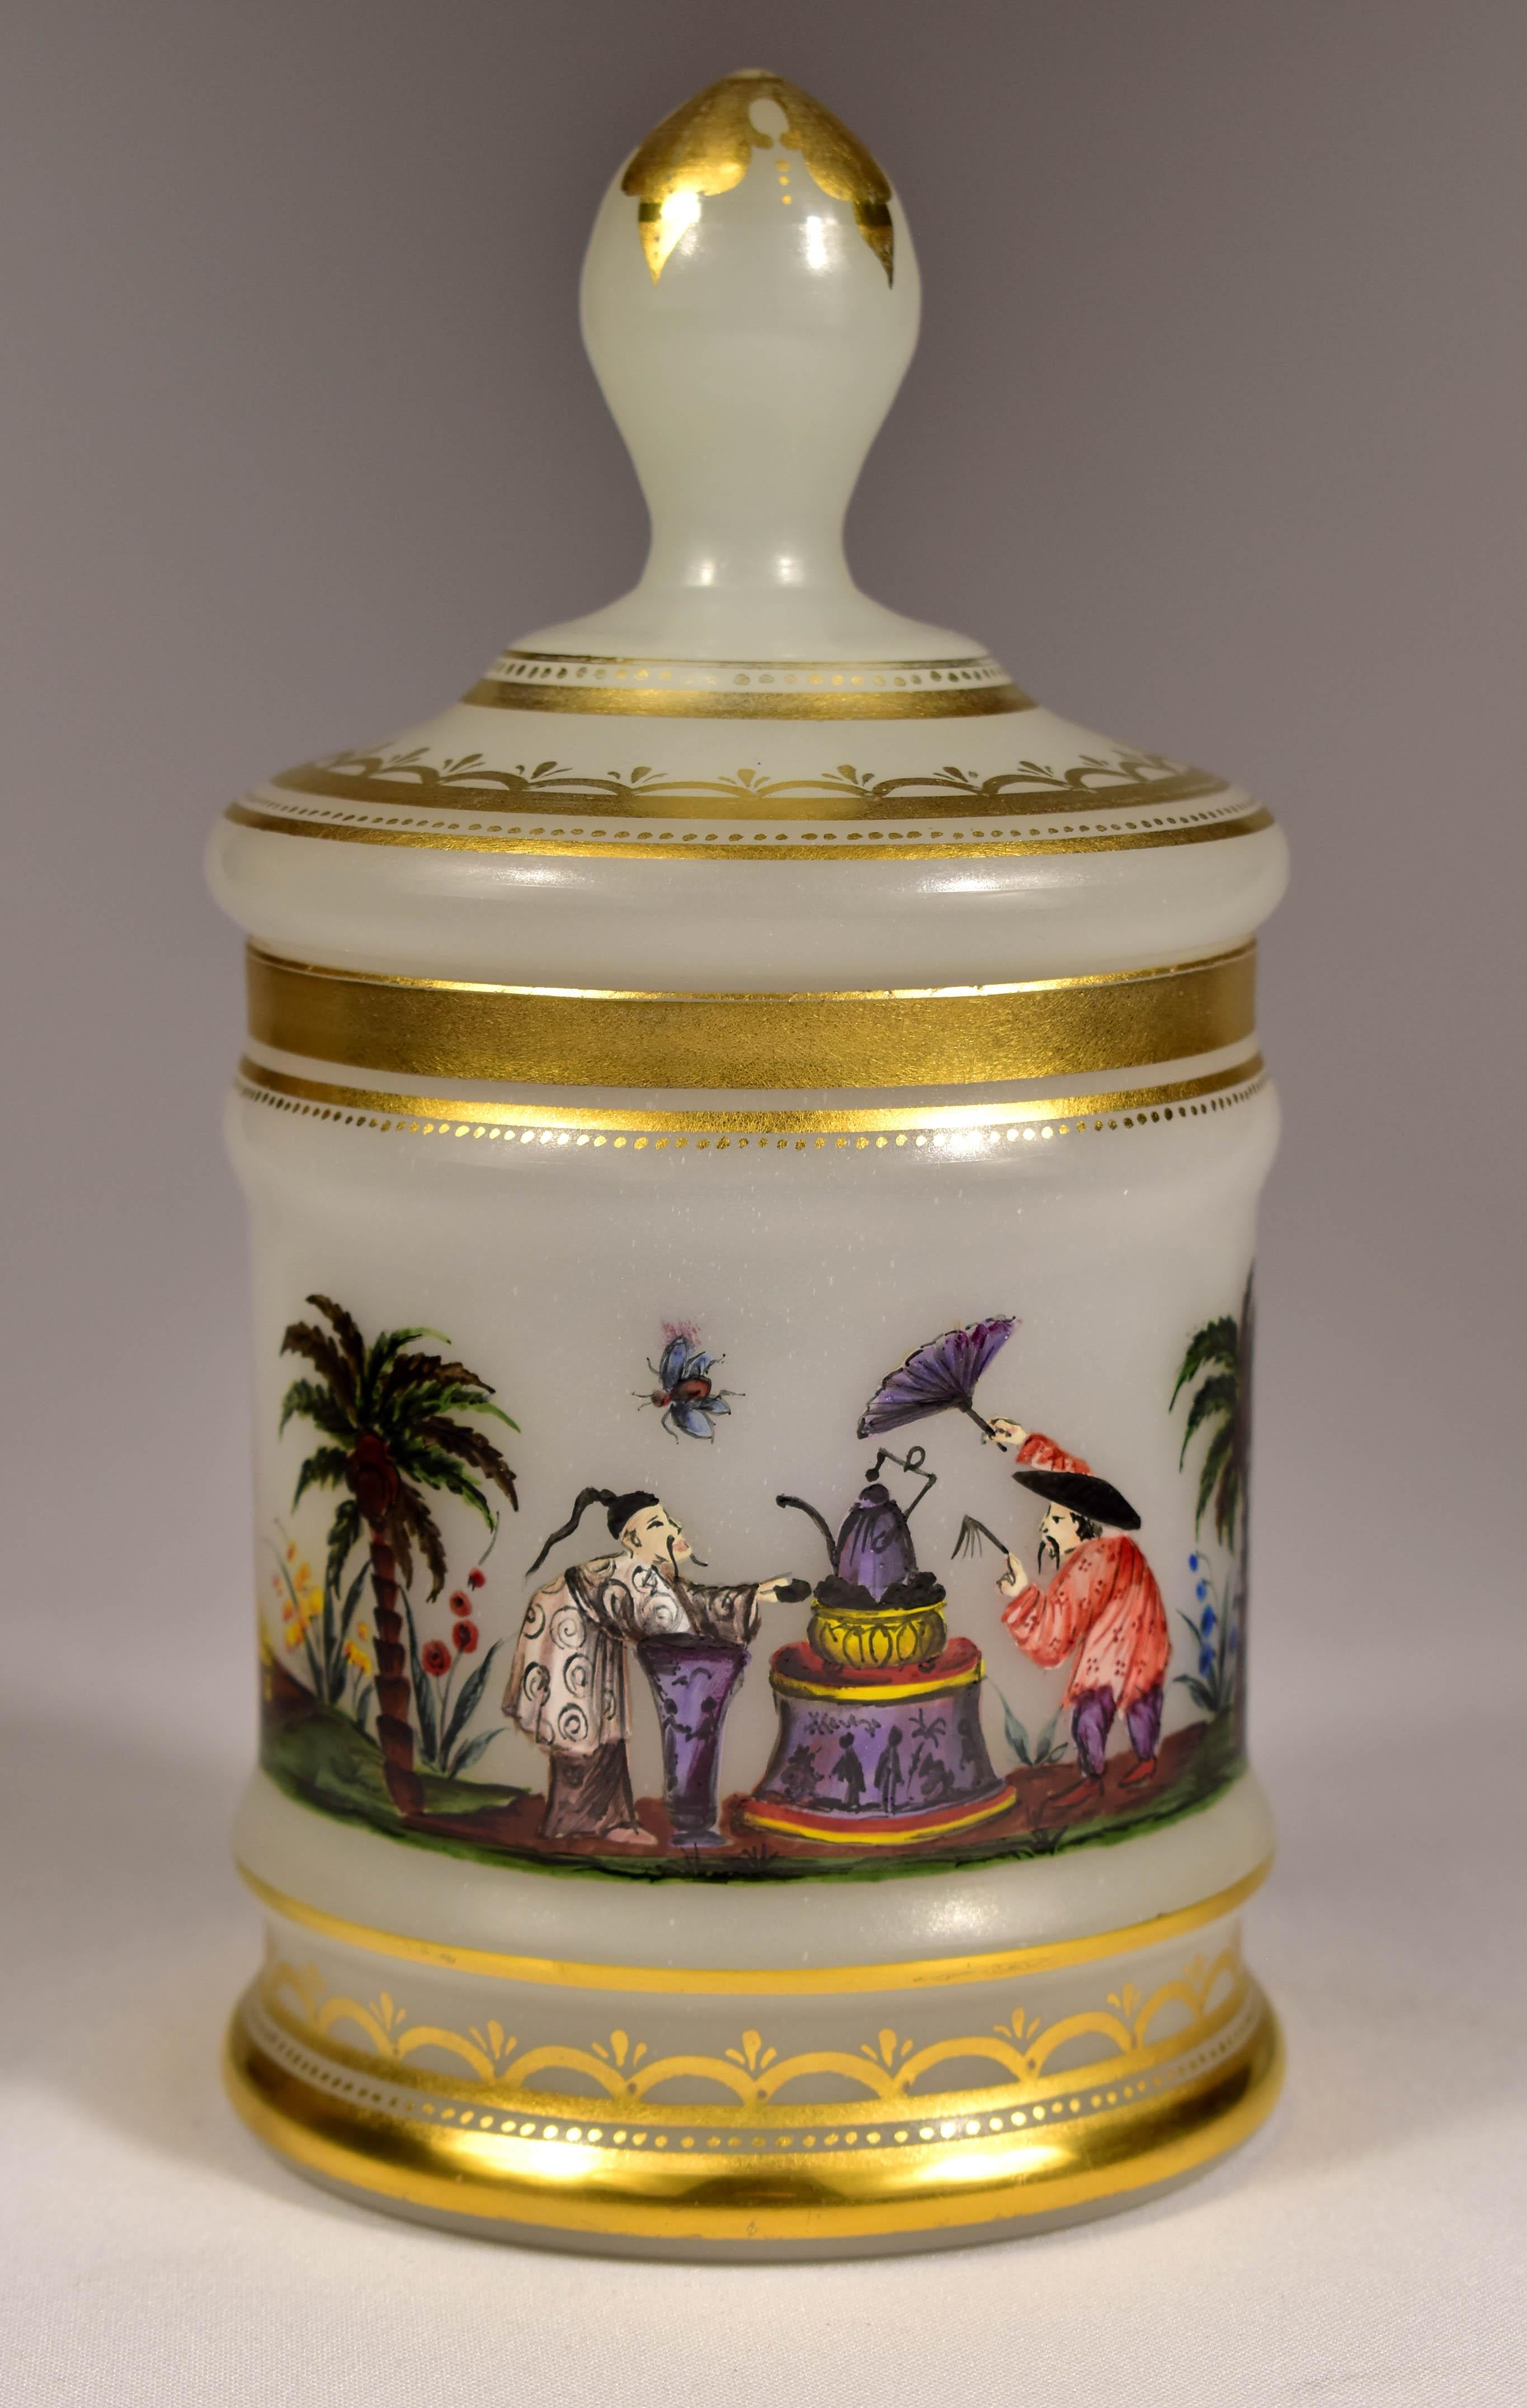 Box made of white opal glass painted with a chinoiserie motif, A motif depicting the preparation and drinking of tea, This motif was very popular in the 19th century. So the box was probably used to store tea. This is probably a work from the first